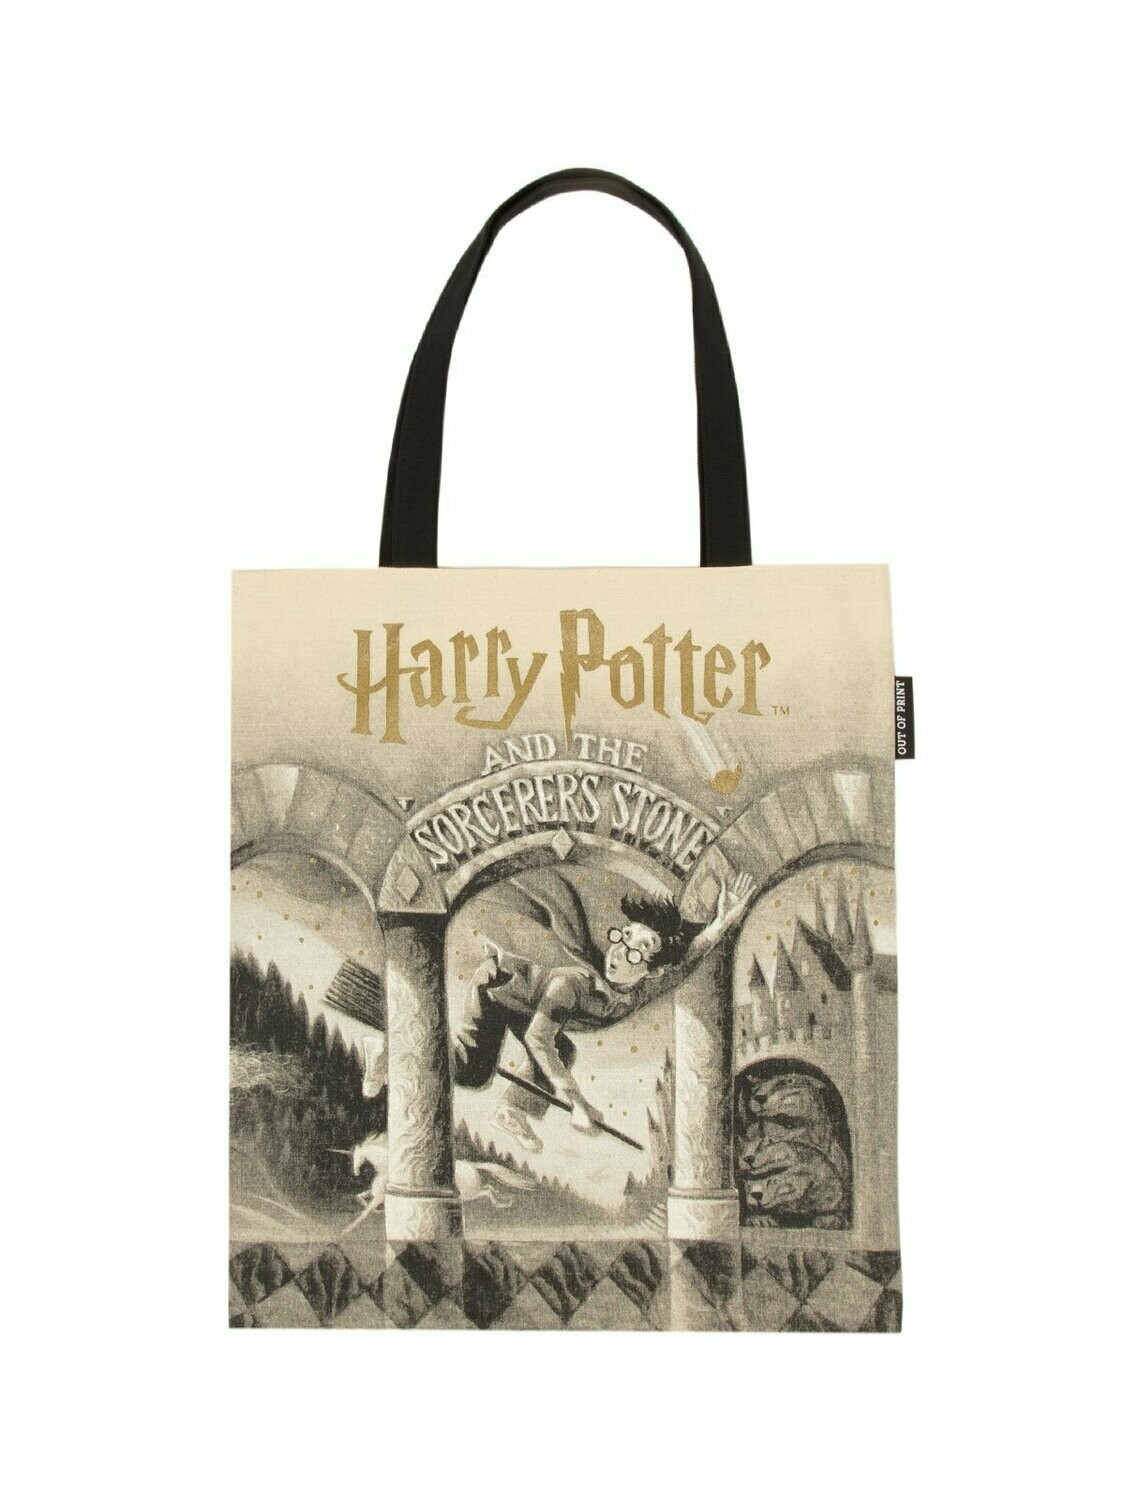 Harry Potter and the Sorcerer's Stone tote bag